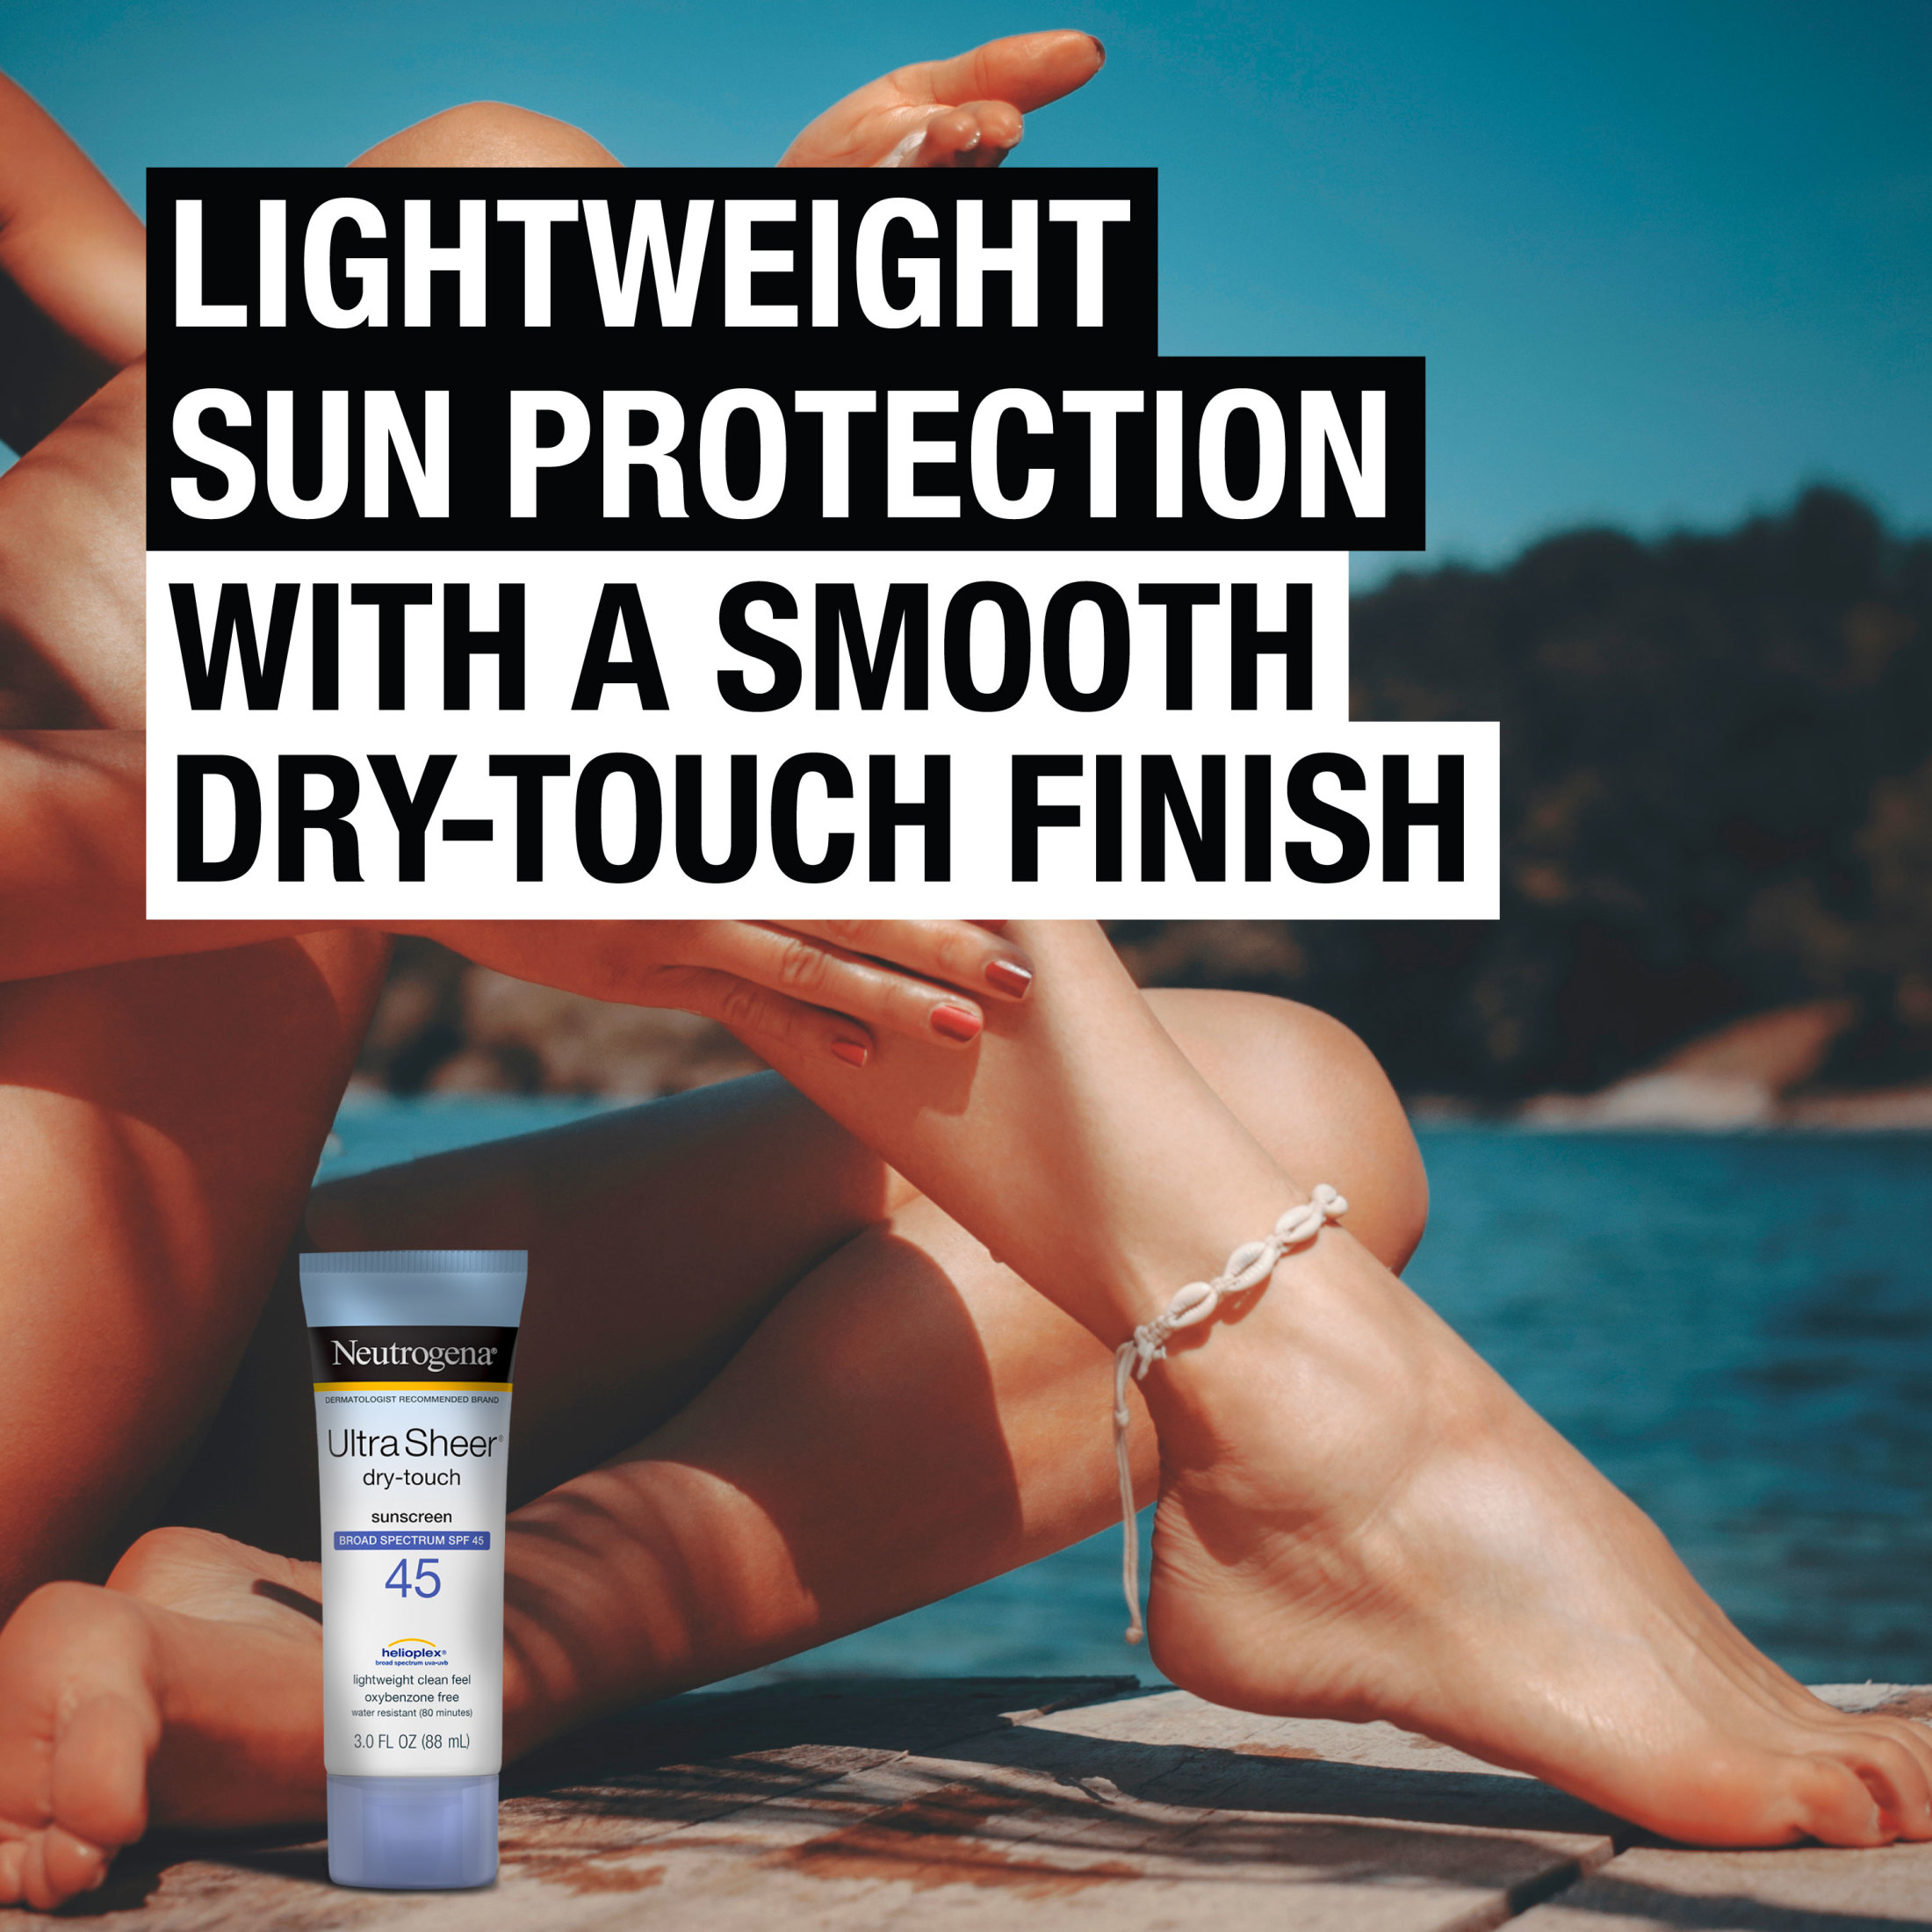 Neutrogena Ultra Sheer Dry-Touch SPF 45 Sunscreen Lotion, 3 fl. oz - image 5 of 9